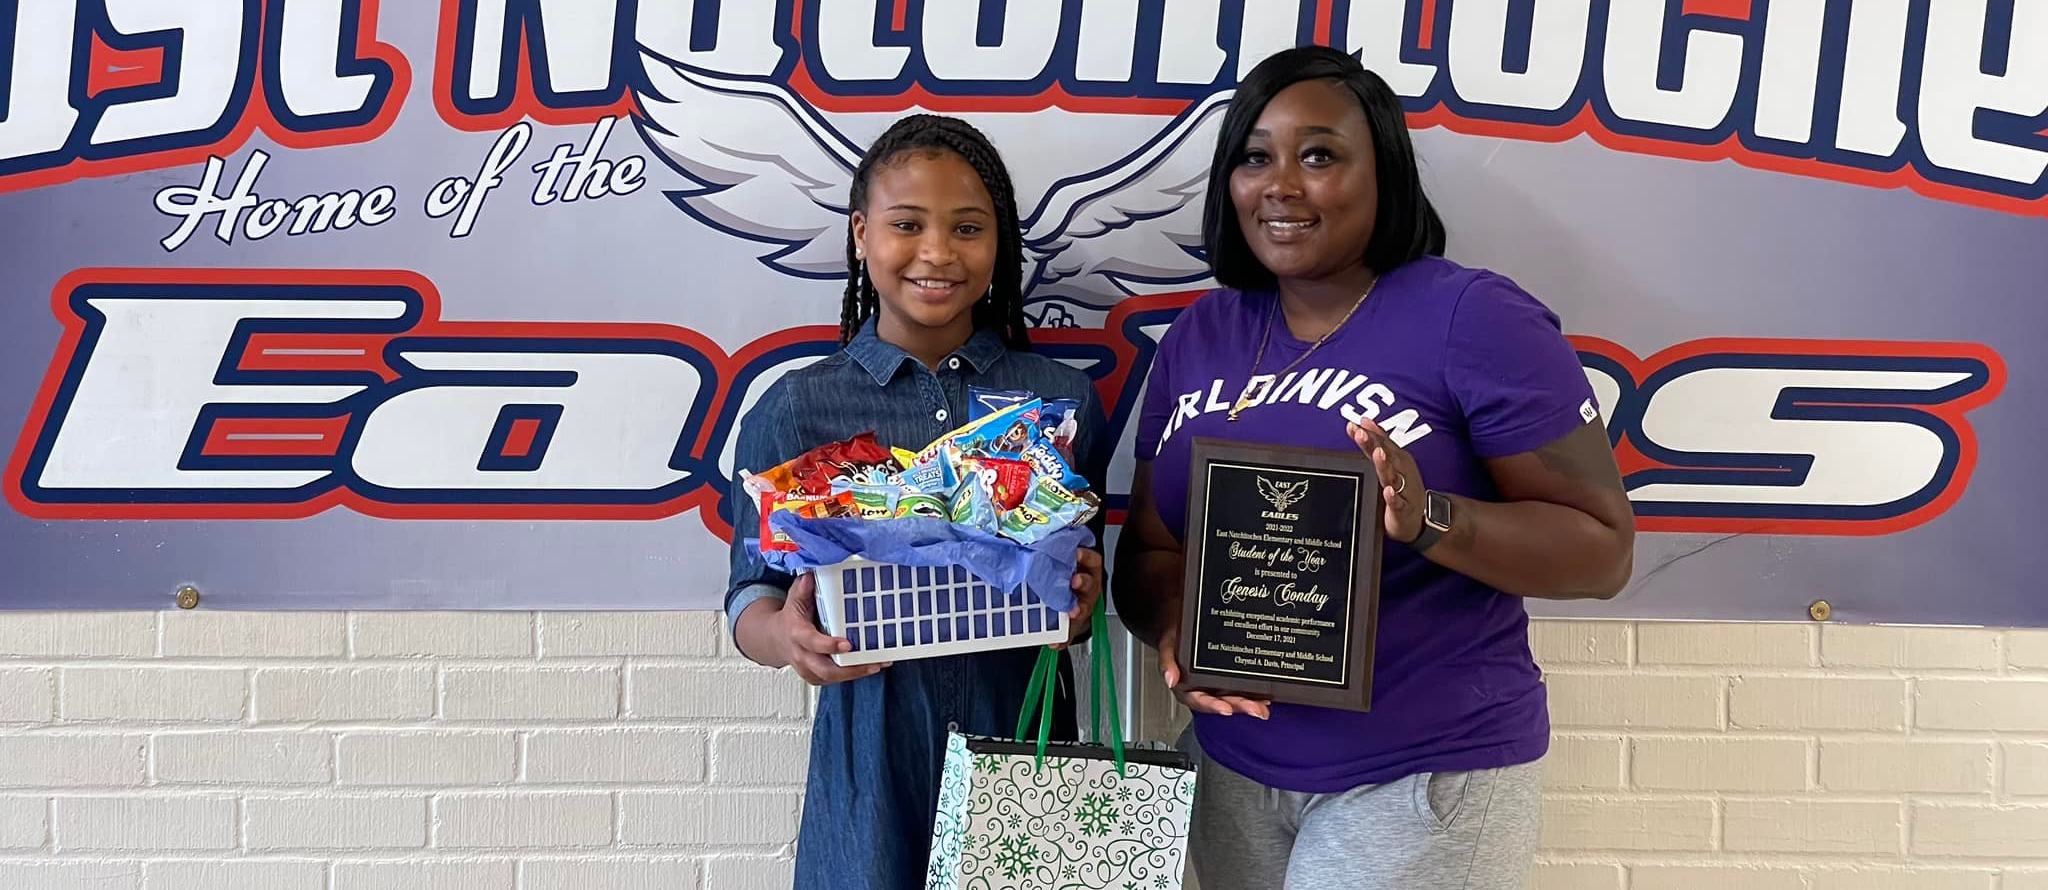 East Natchitoches Student of the Year Genesis Conday